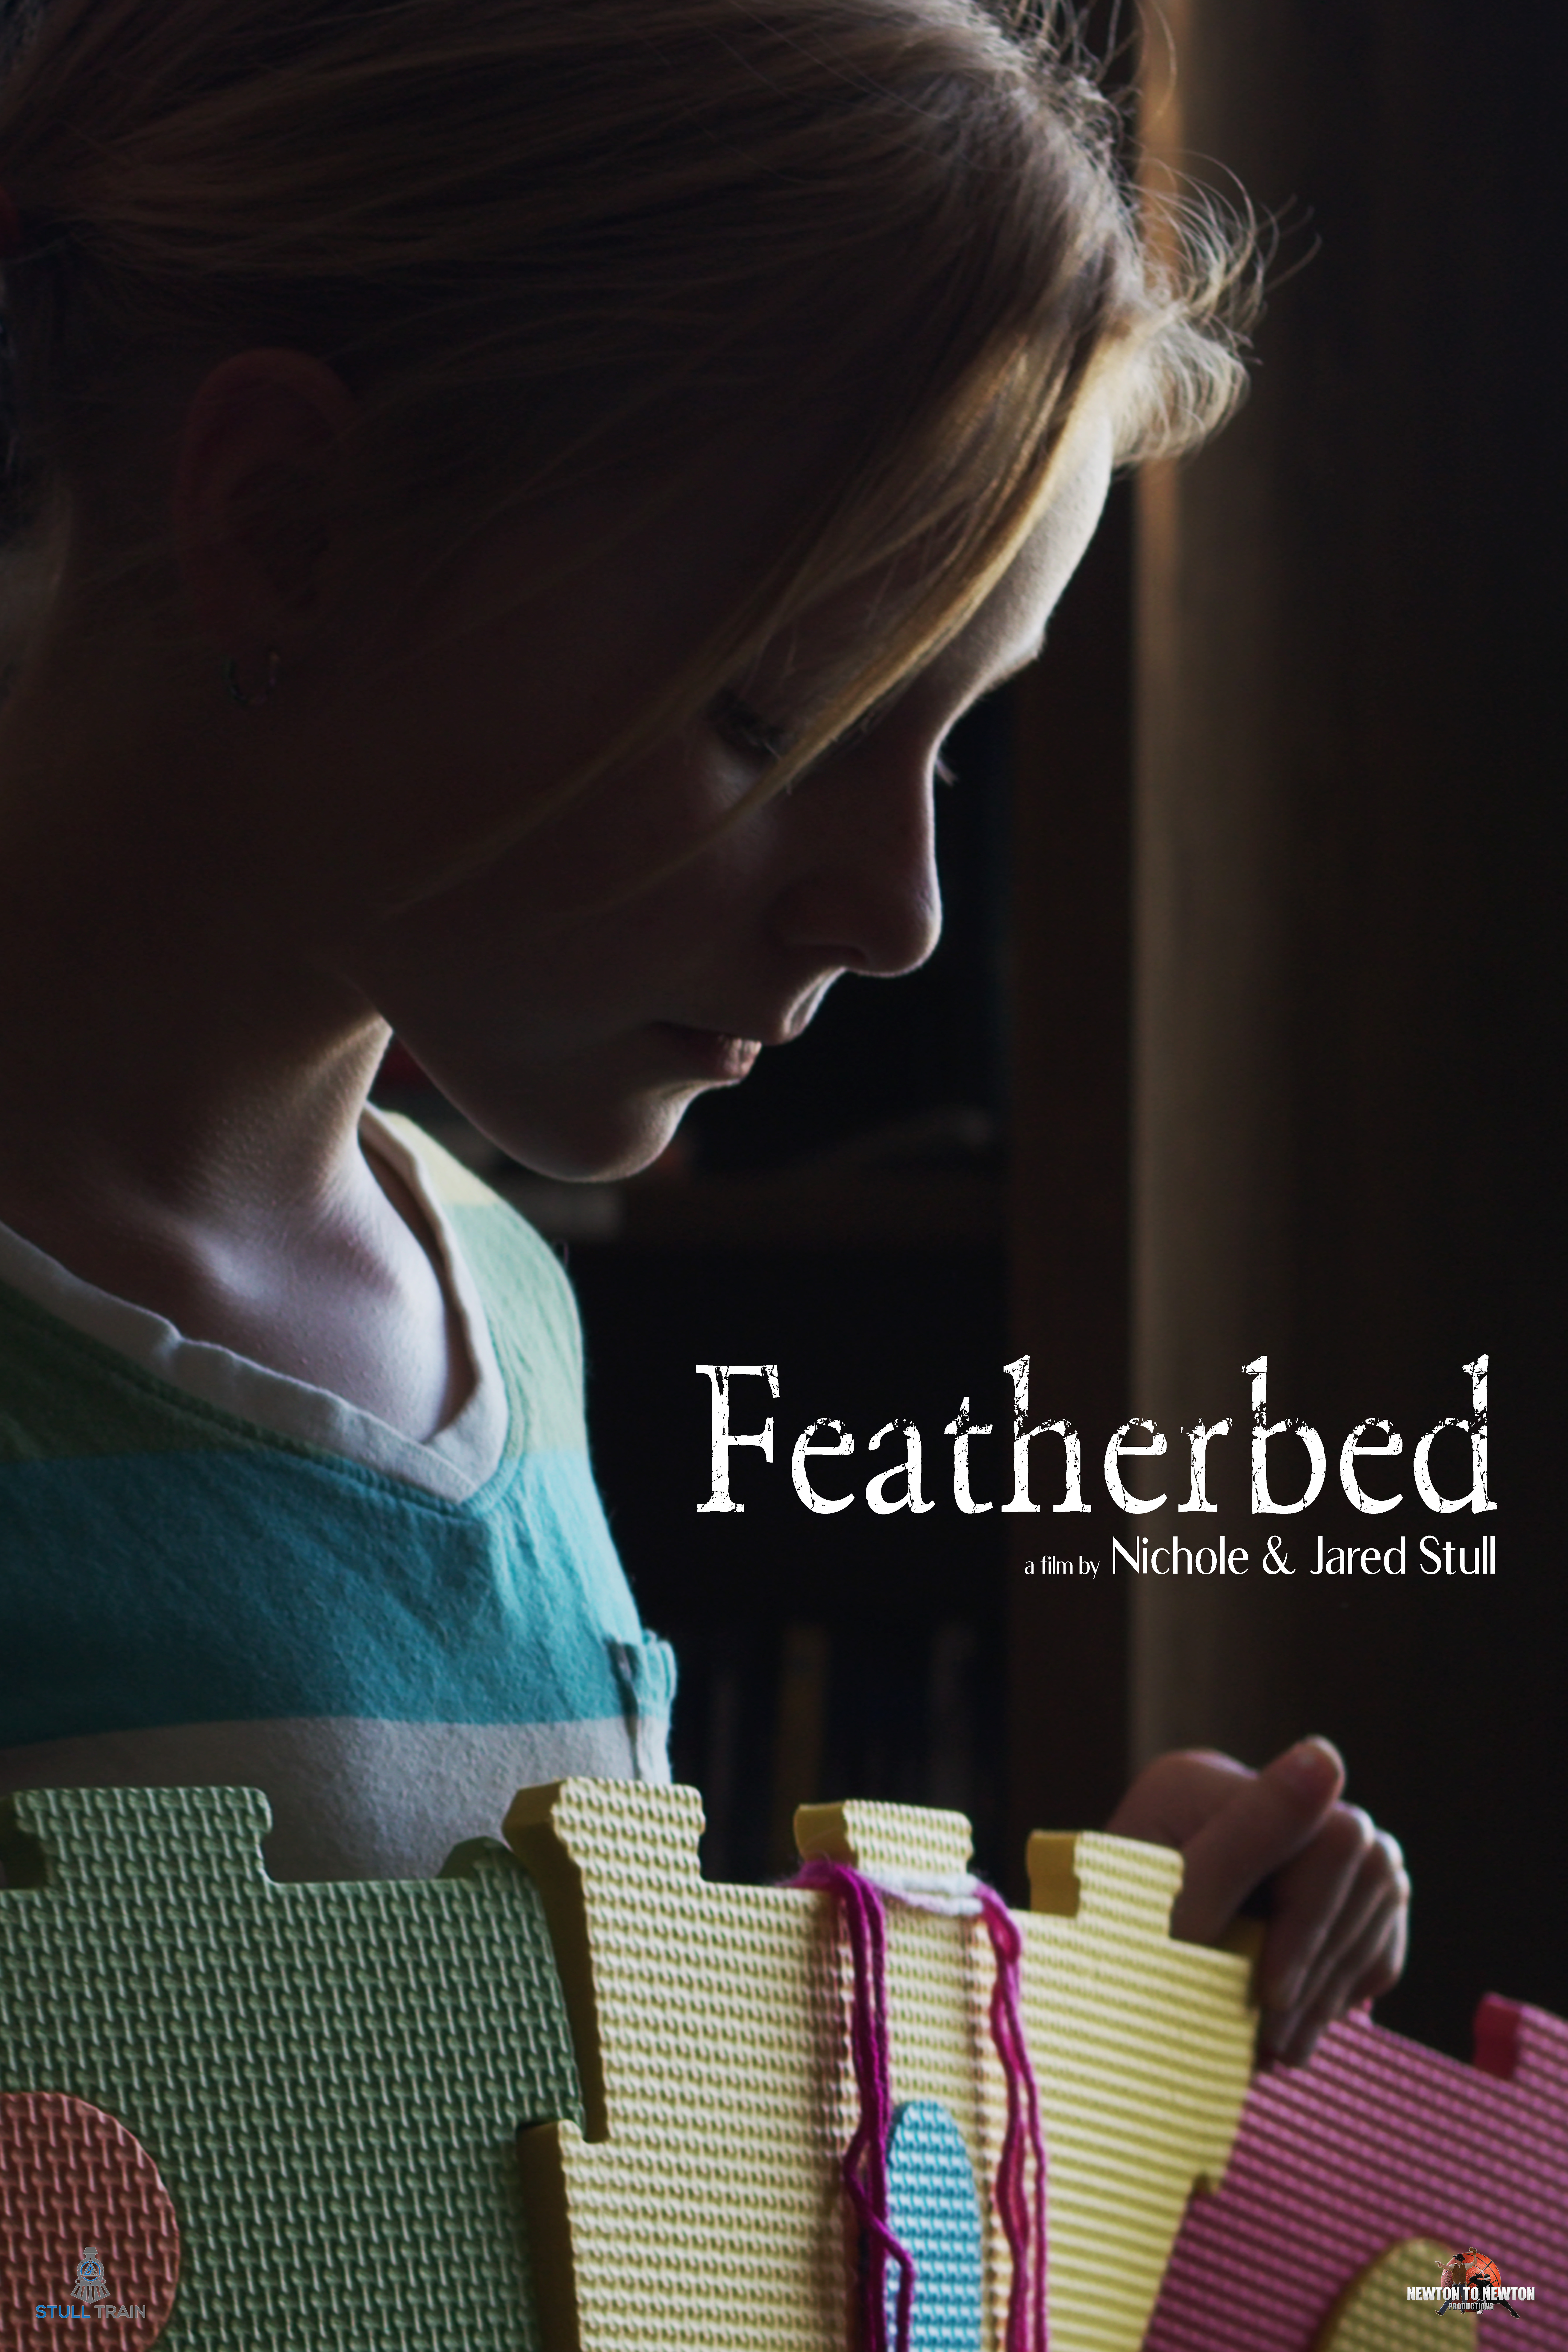 Featherbed (2021)